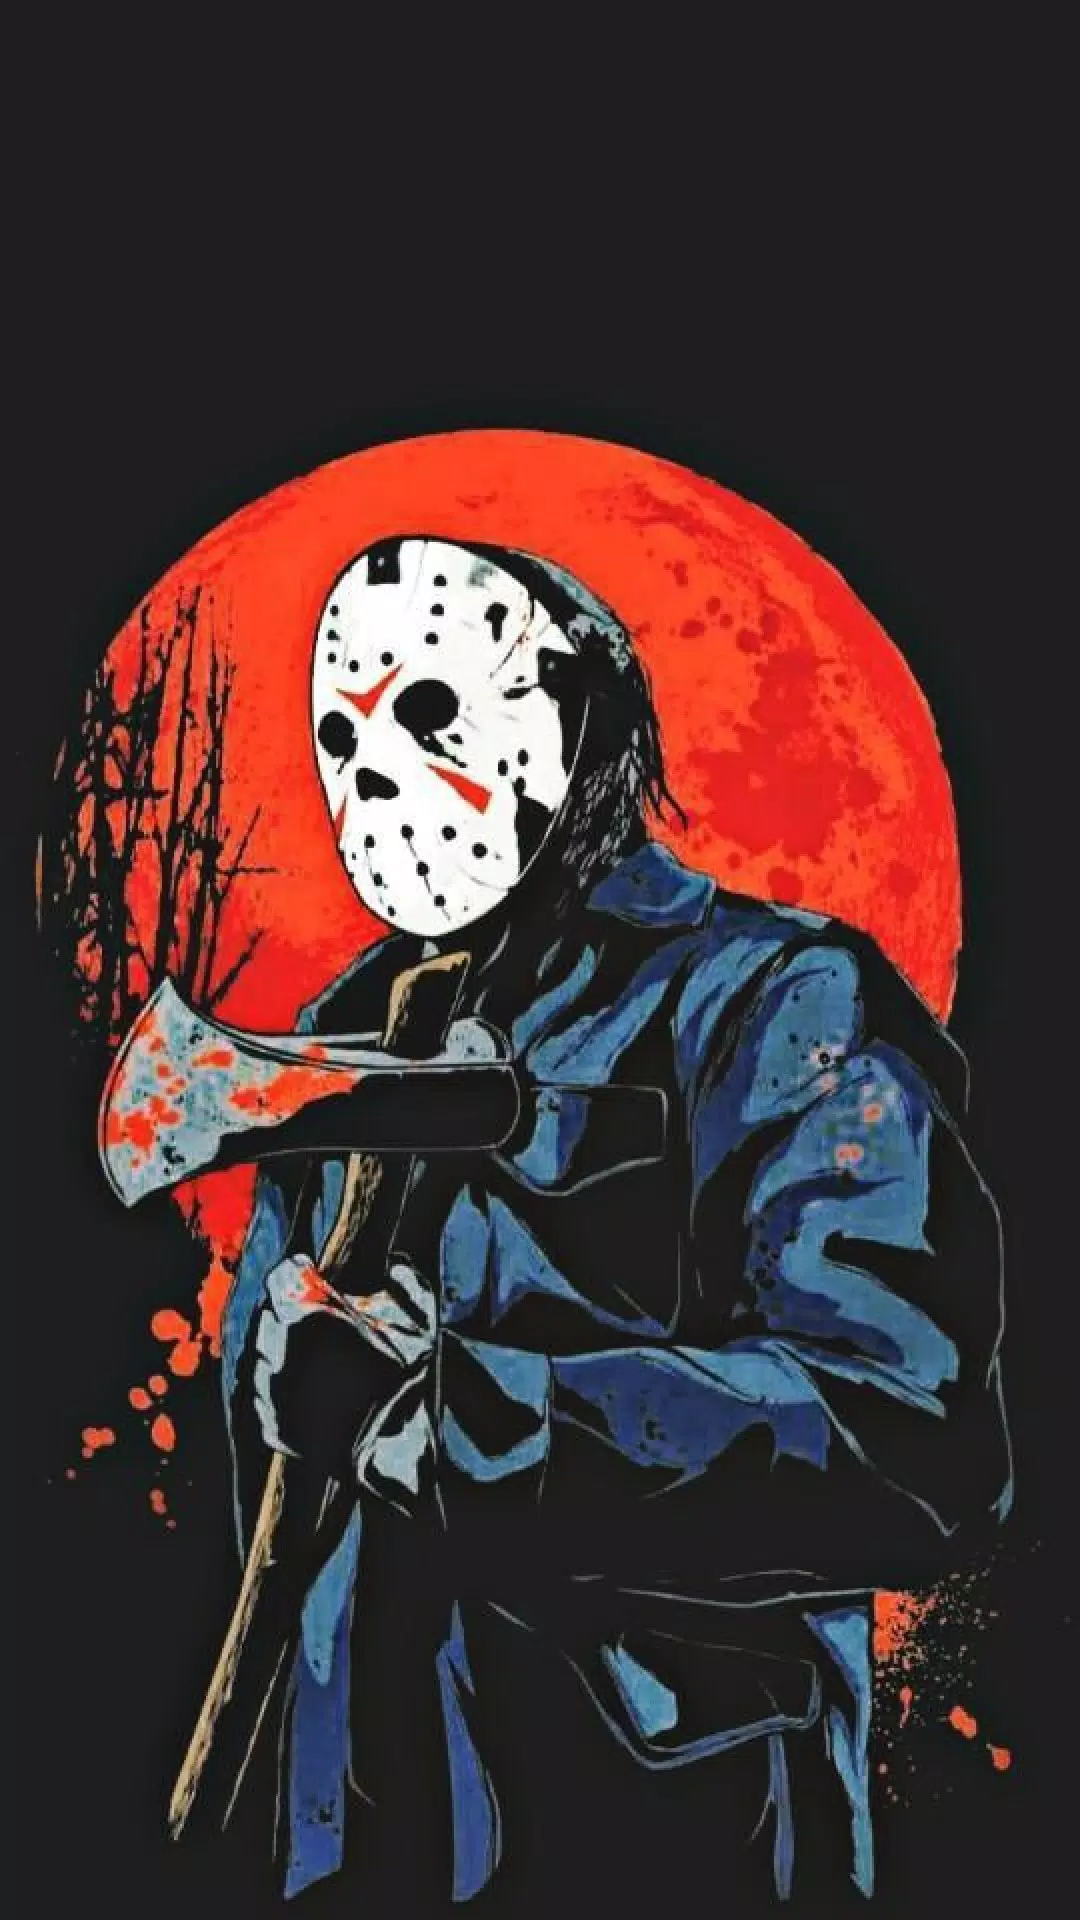 Friday the 13th Jason Voorhees iPhone Wallpaper with high-resolution 1080x1920 pixel. You can use this wallpaper for your iPhone 5, 6, 7, 8, X, XS, XR backgrounds, Mobile Screensaver, or iPad Lock Screen - Horror